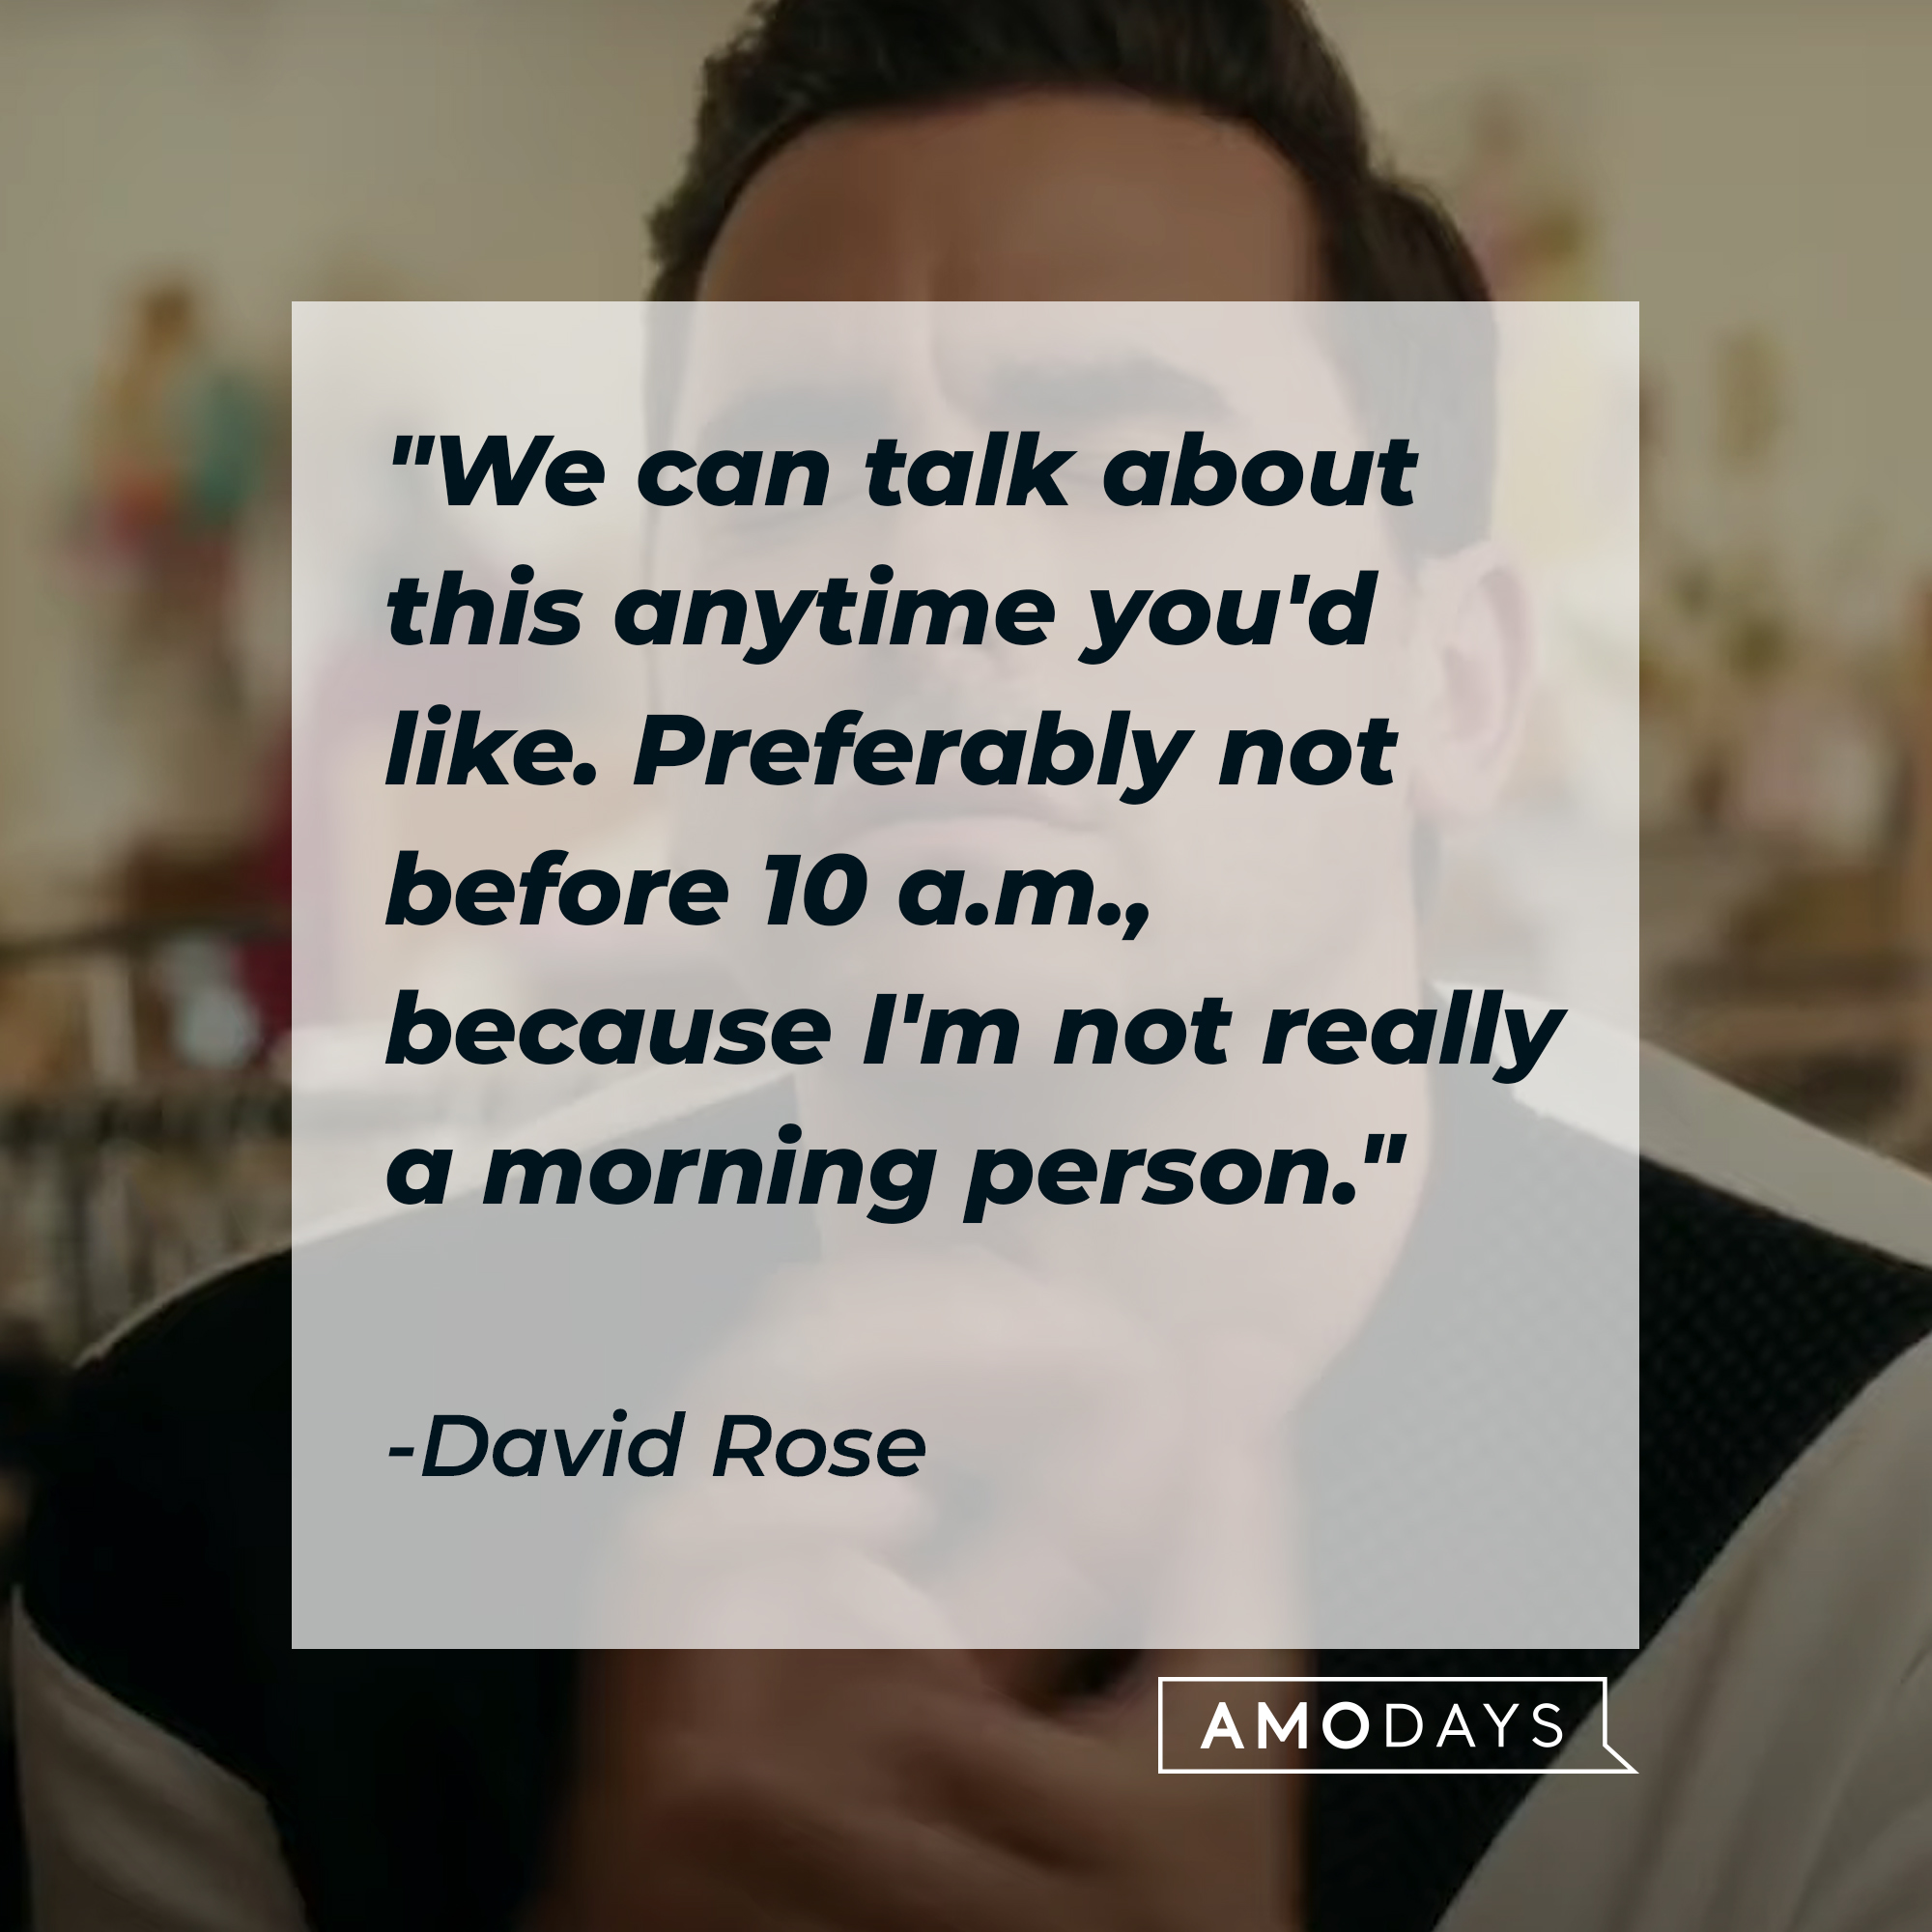 A photo of David Rose with the quote, "We can talk about this anytime you'd like. Preferably not before 10 a.m., because I'm not really a morning person." | Source: YouTube/PopTVVideo